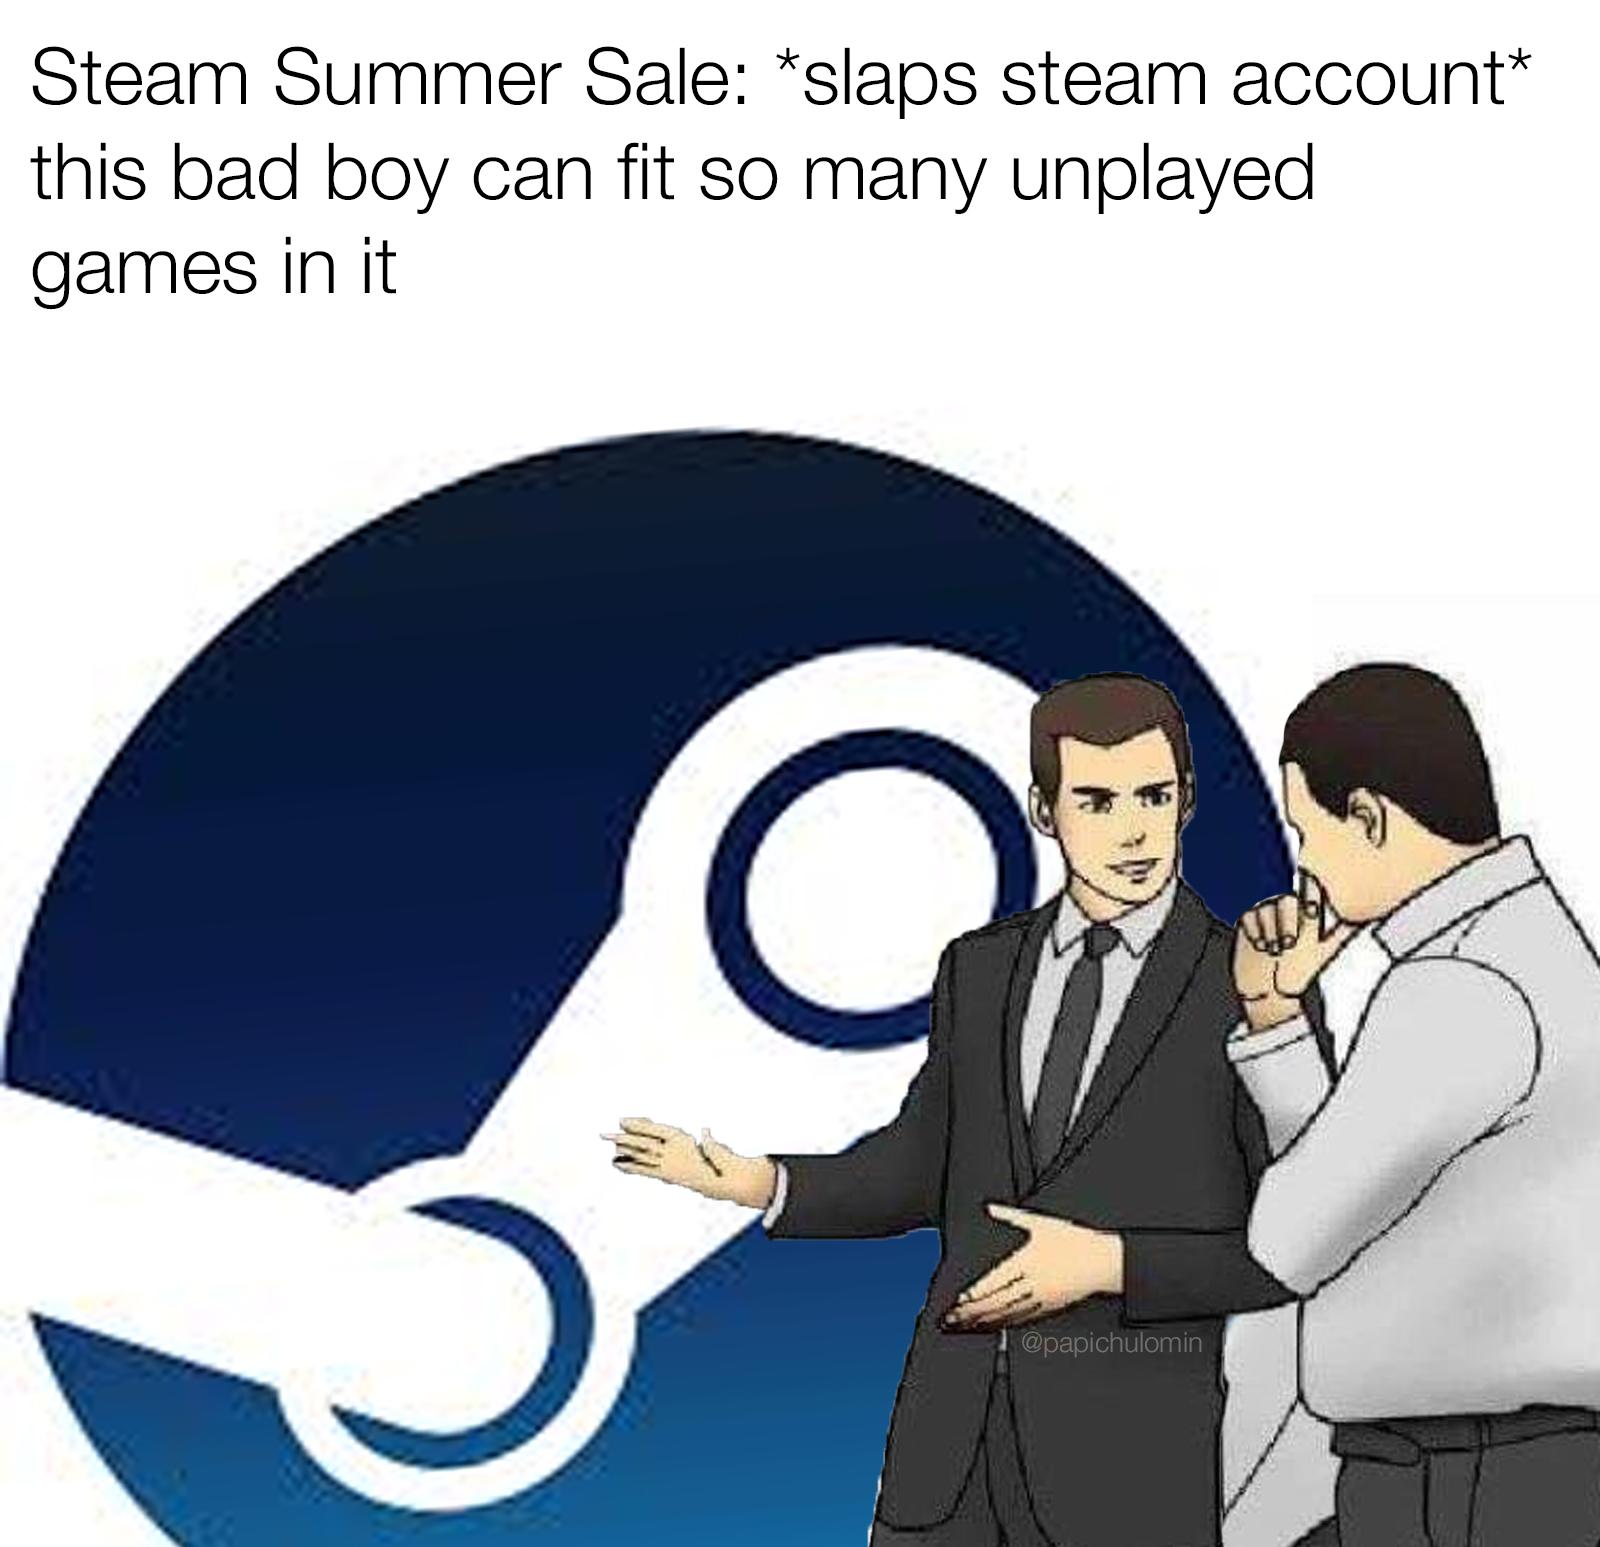 car salesman meme steam - Steam Summer Sale slaps steam account this bad boy can fit so many unplayed games in it 1